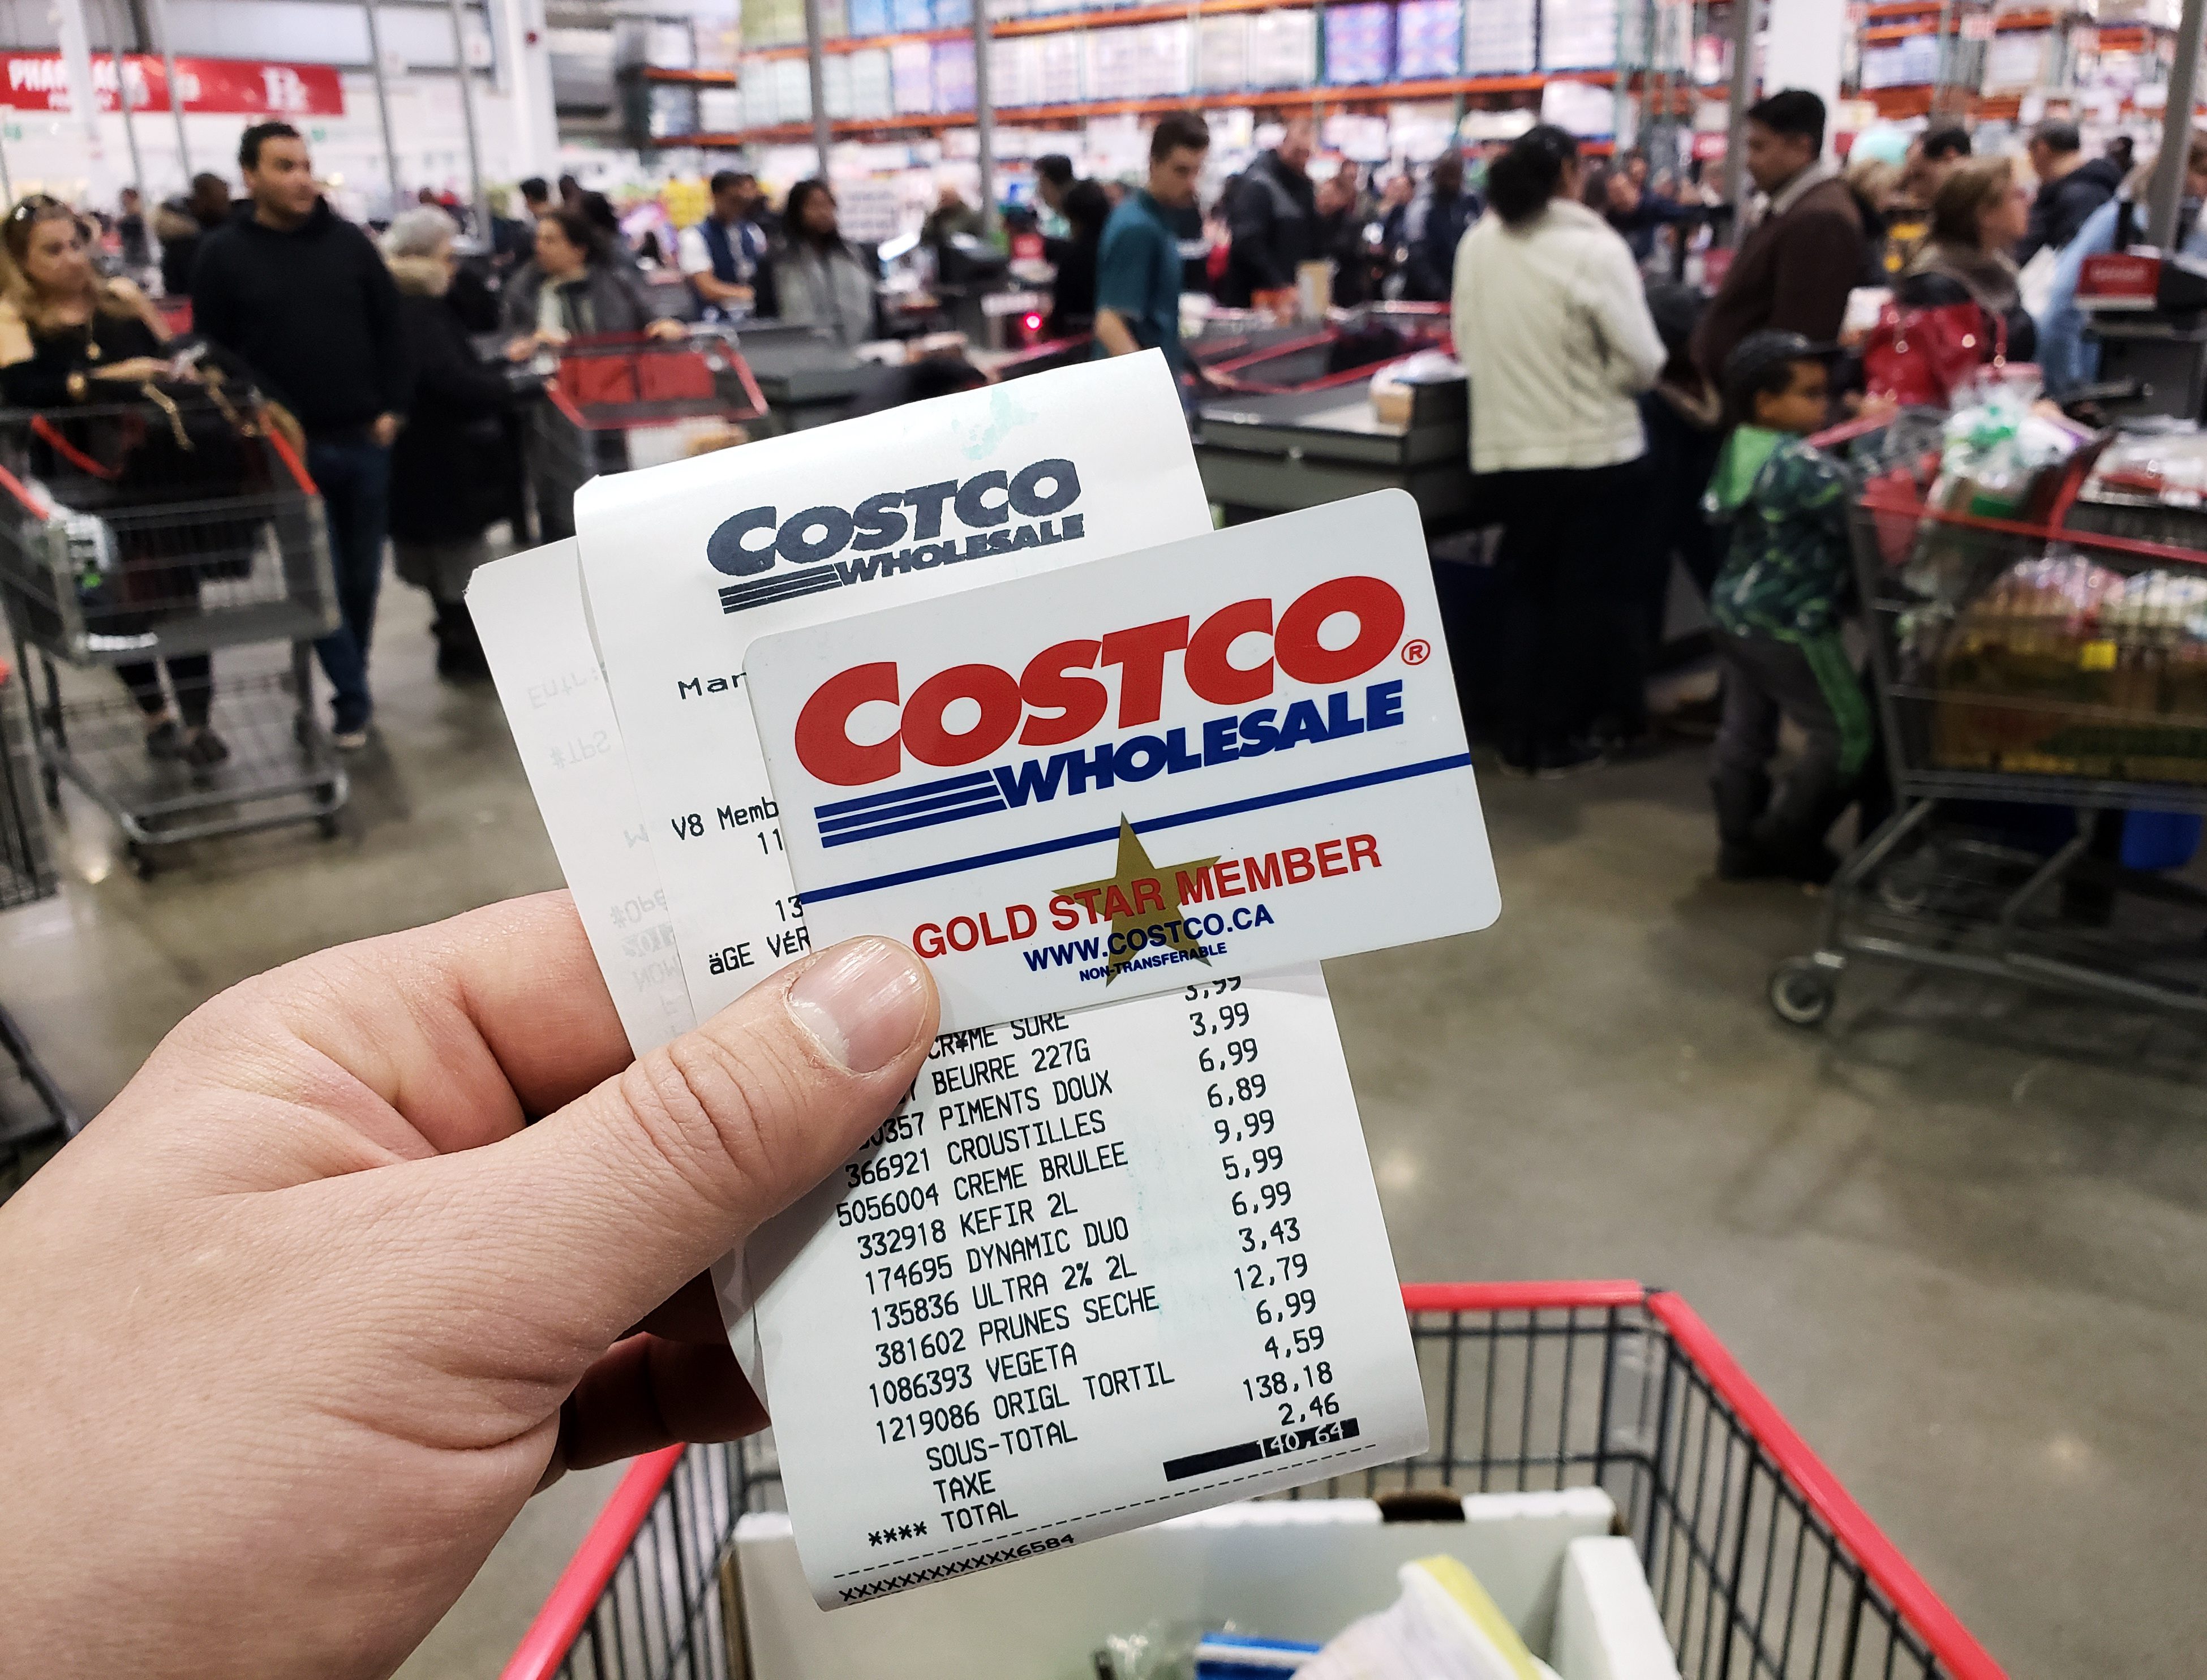 Costco Plans to Build Apartments Above Store (Will They Be Cheaper for